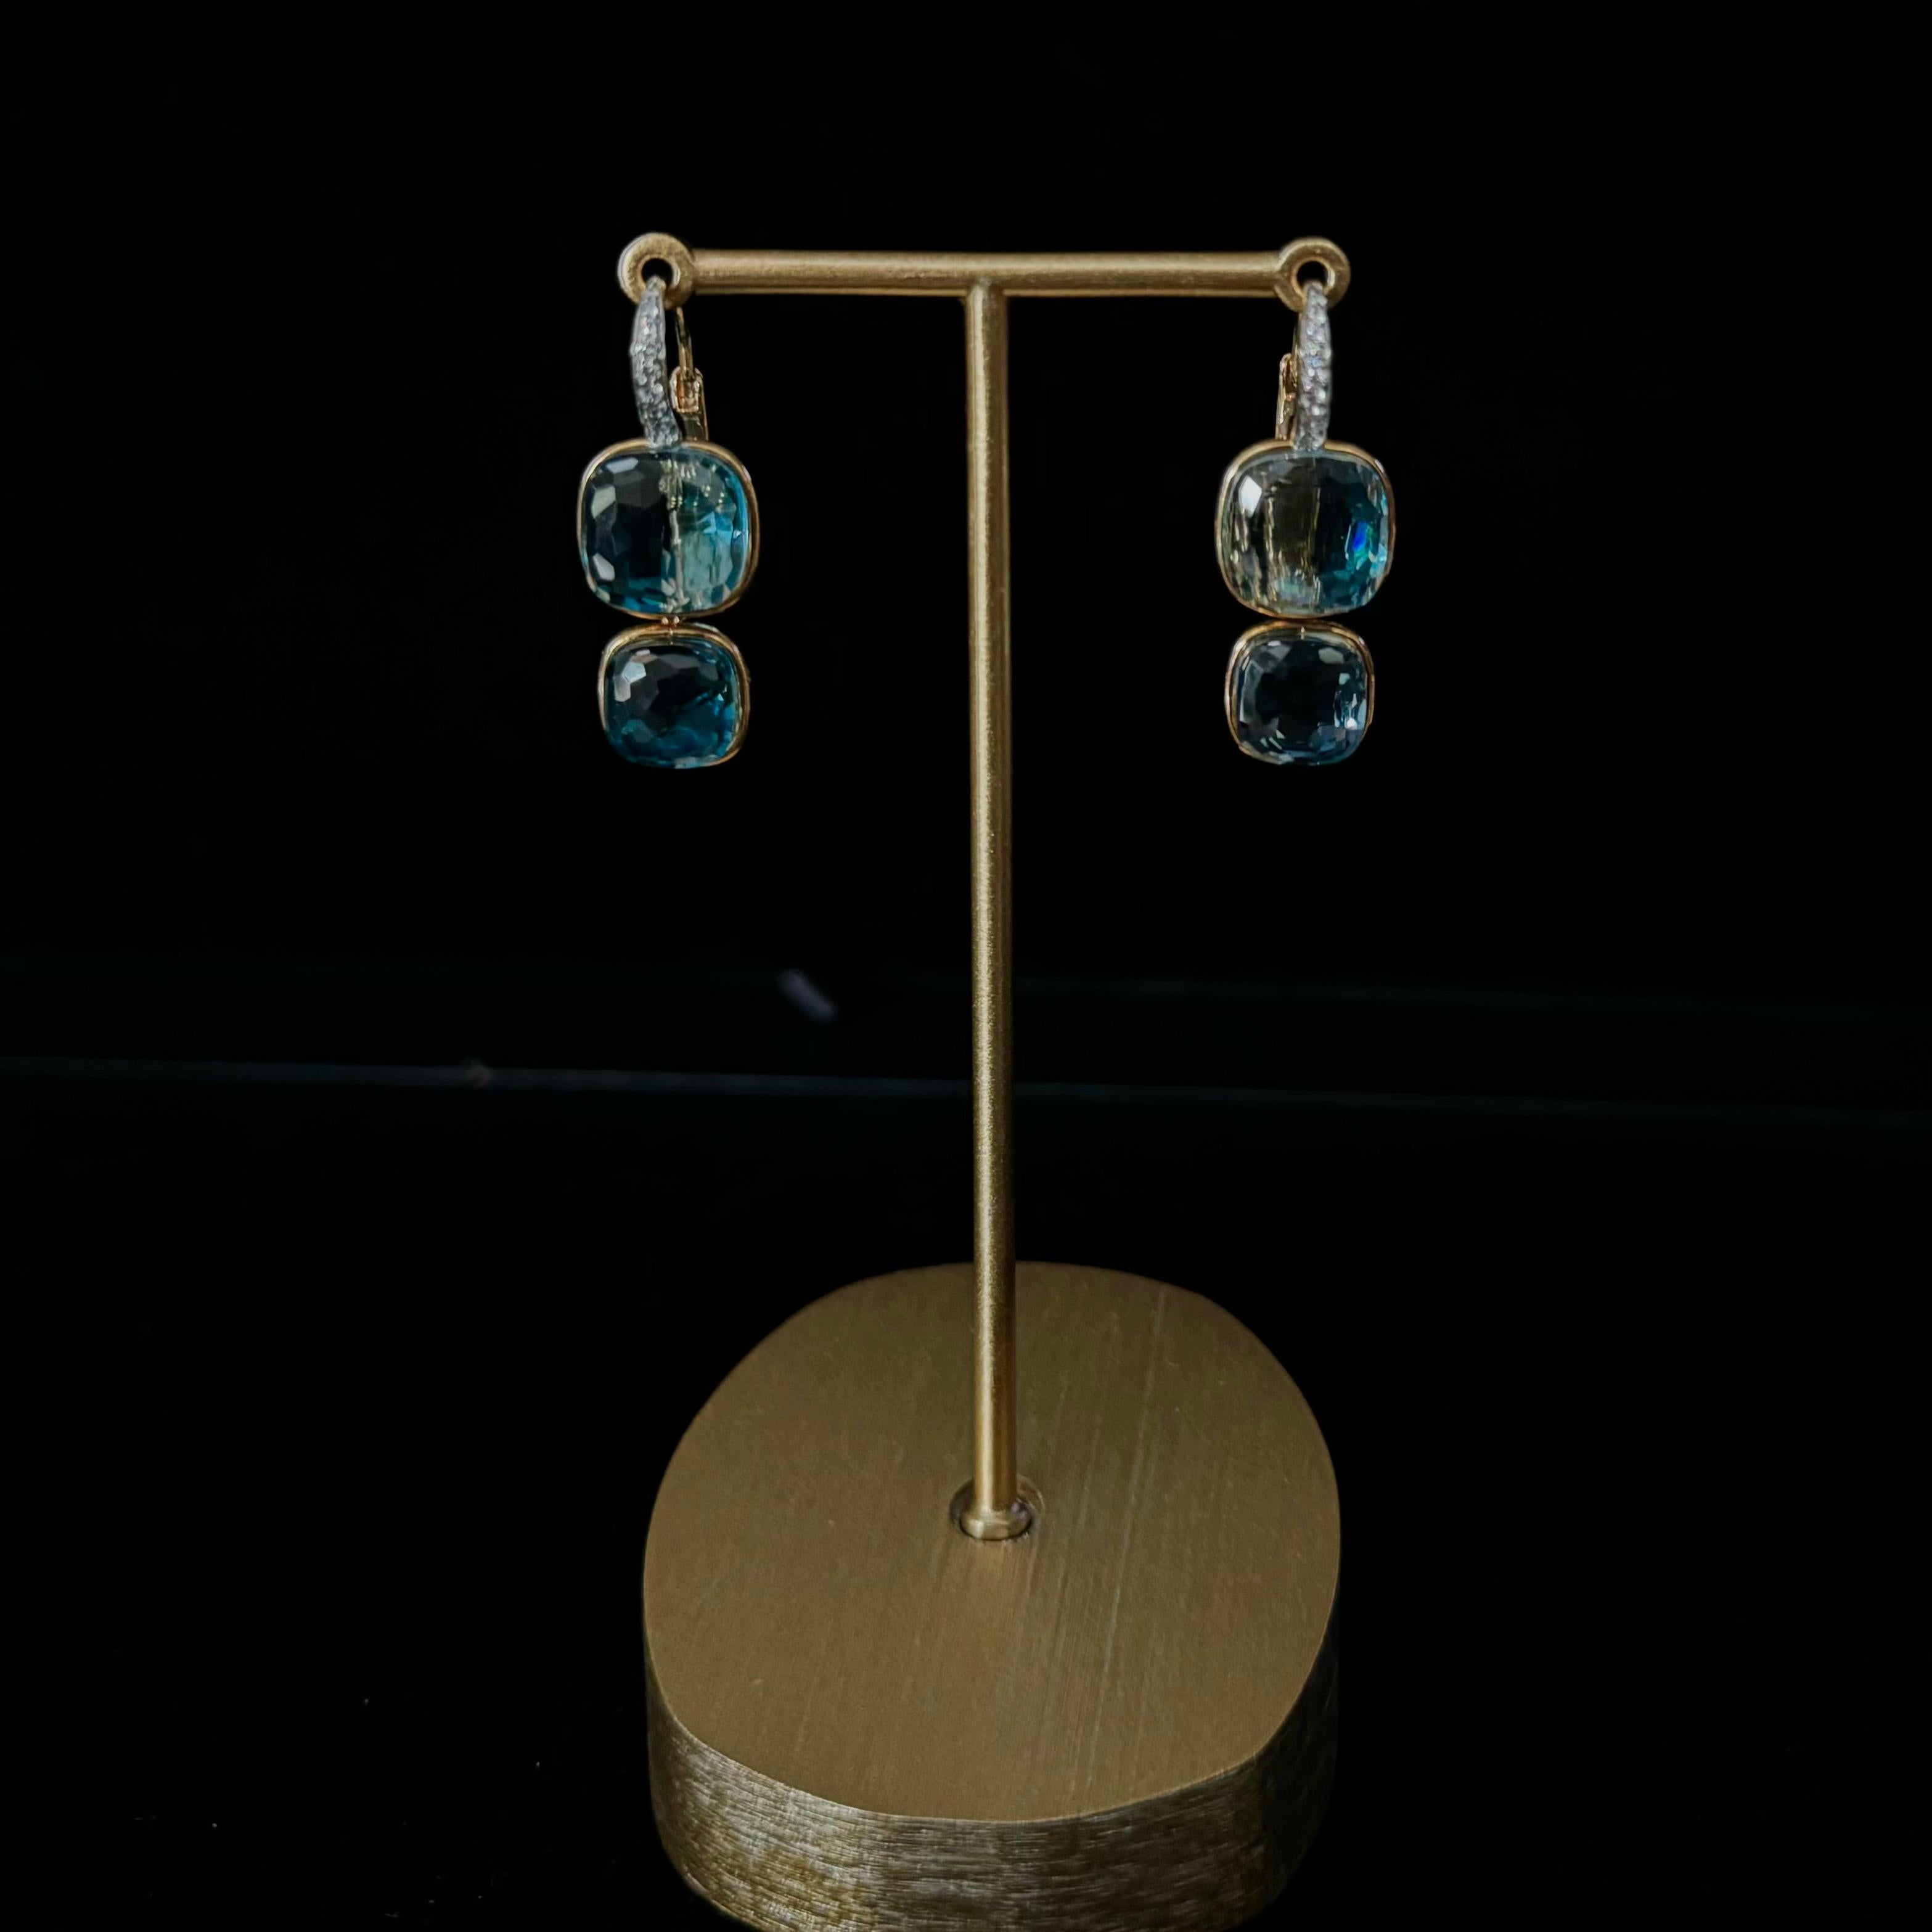 Pomellato Nudo 18K Rose Gold Sky Blue Topaz Double Drop Pendant Earrings In New Condition For Sale In Carmel By The Sea, CA